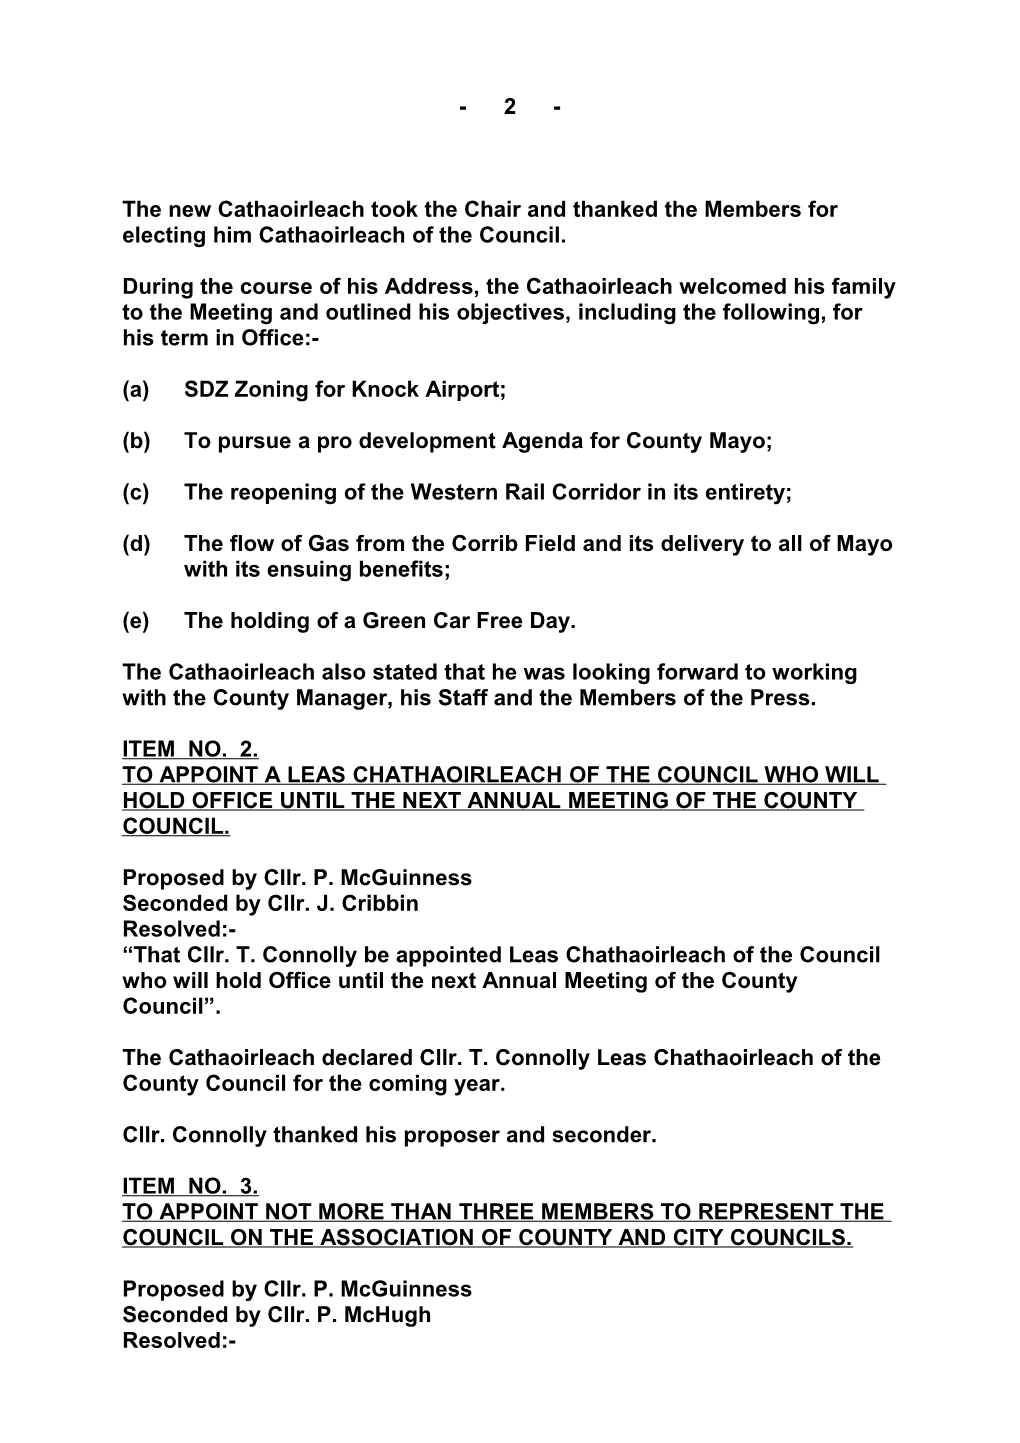 MINUTES of MAYO COUNTY COUNCIL ANNUAL MEETING HELD on MONDAY, 30Th JUNE, 2008, at 10